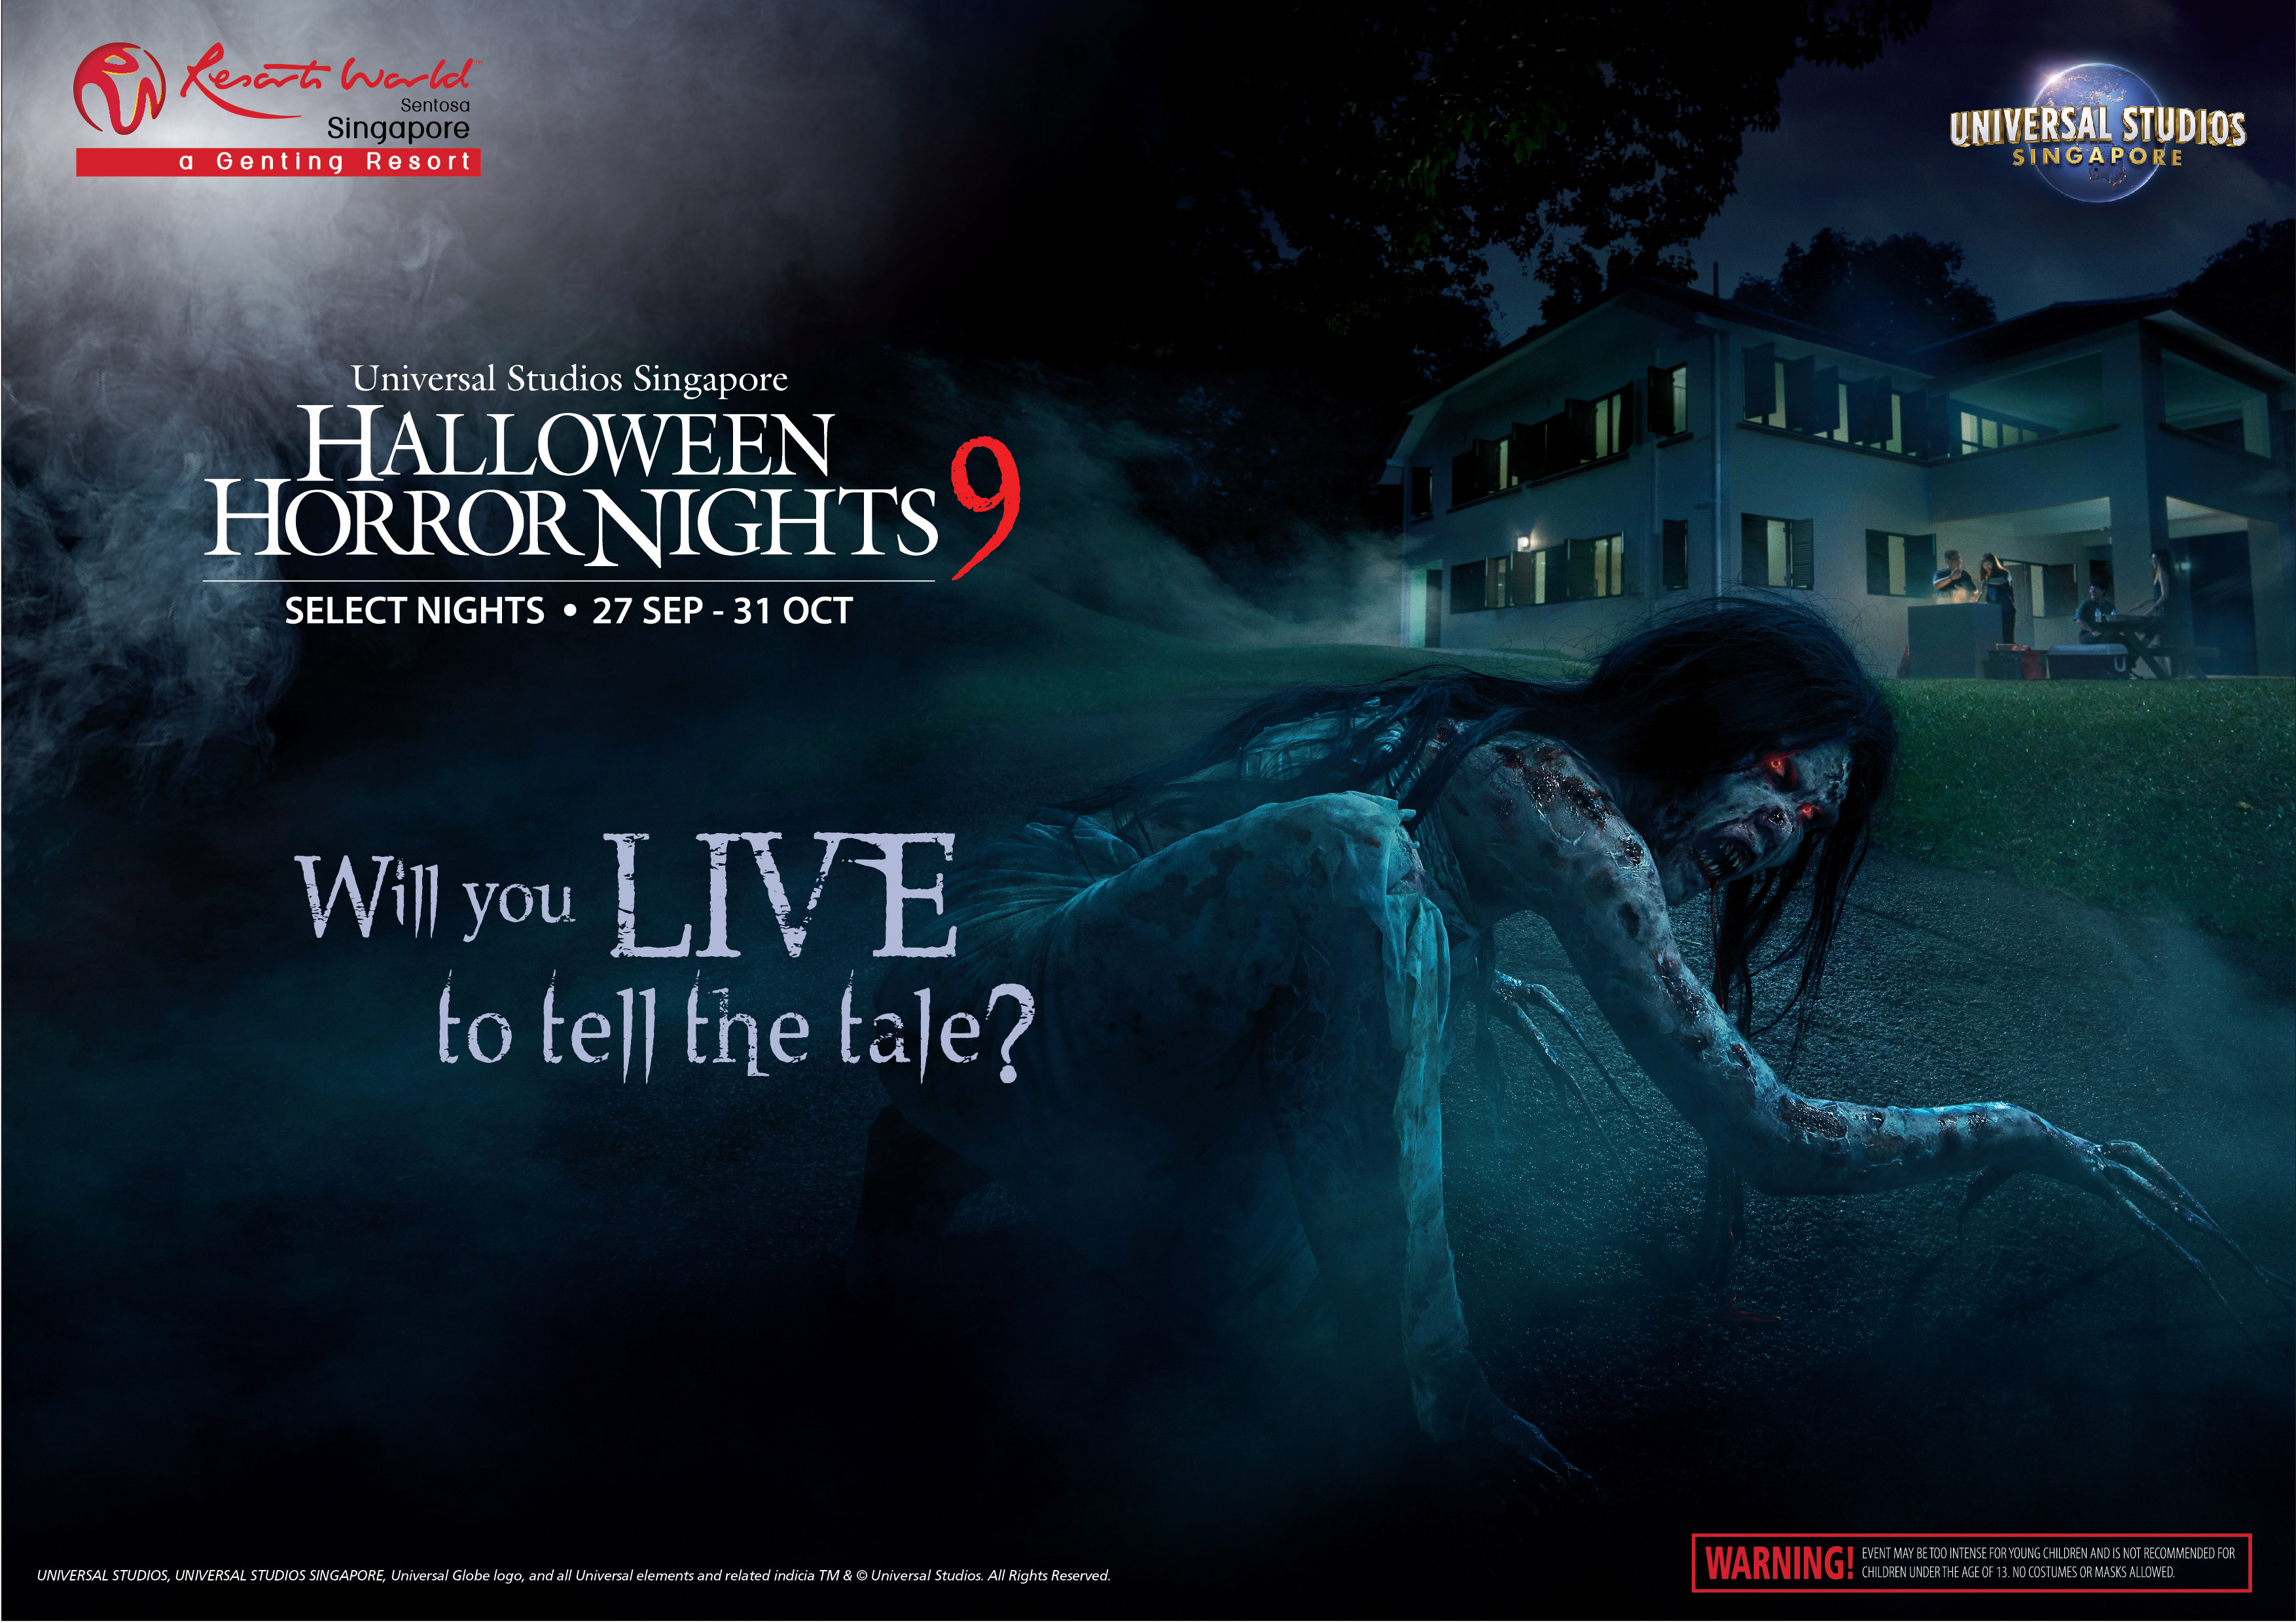 Halloween is coming early at Universal Studios Singapore - First-Ever Haunted House by Renowned Thai Filmmakers - Alvinology